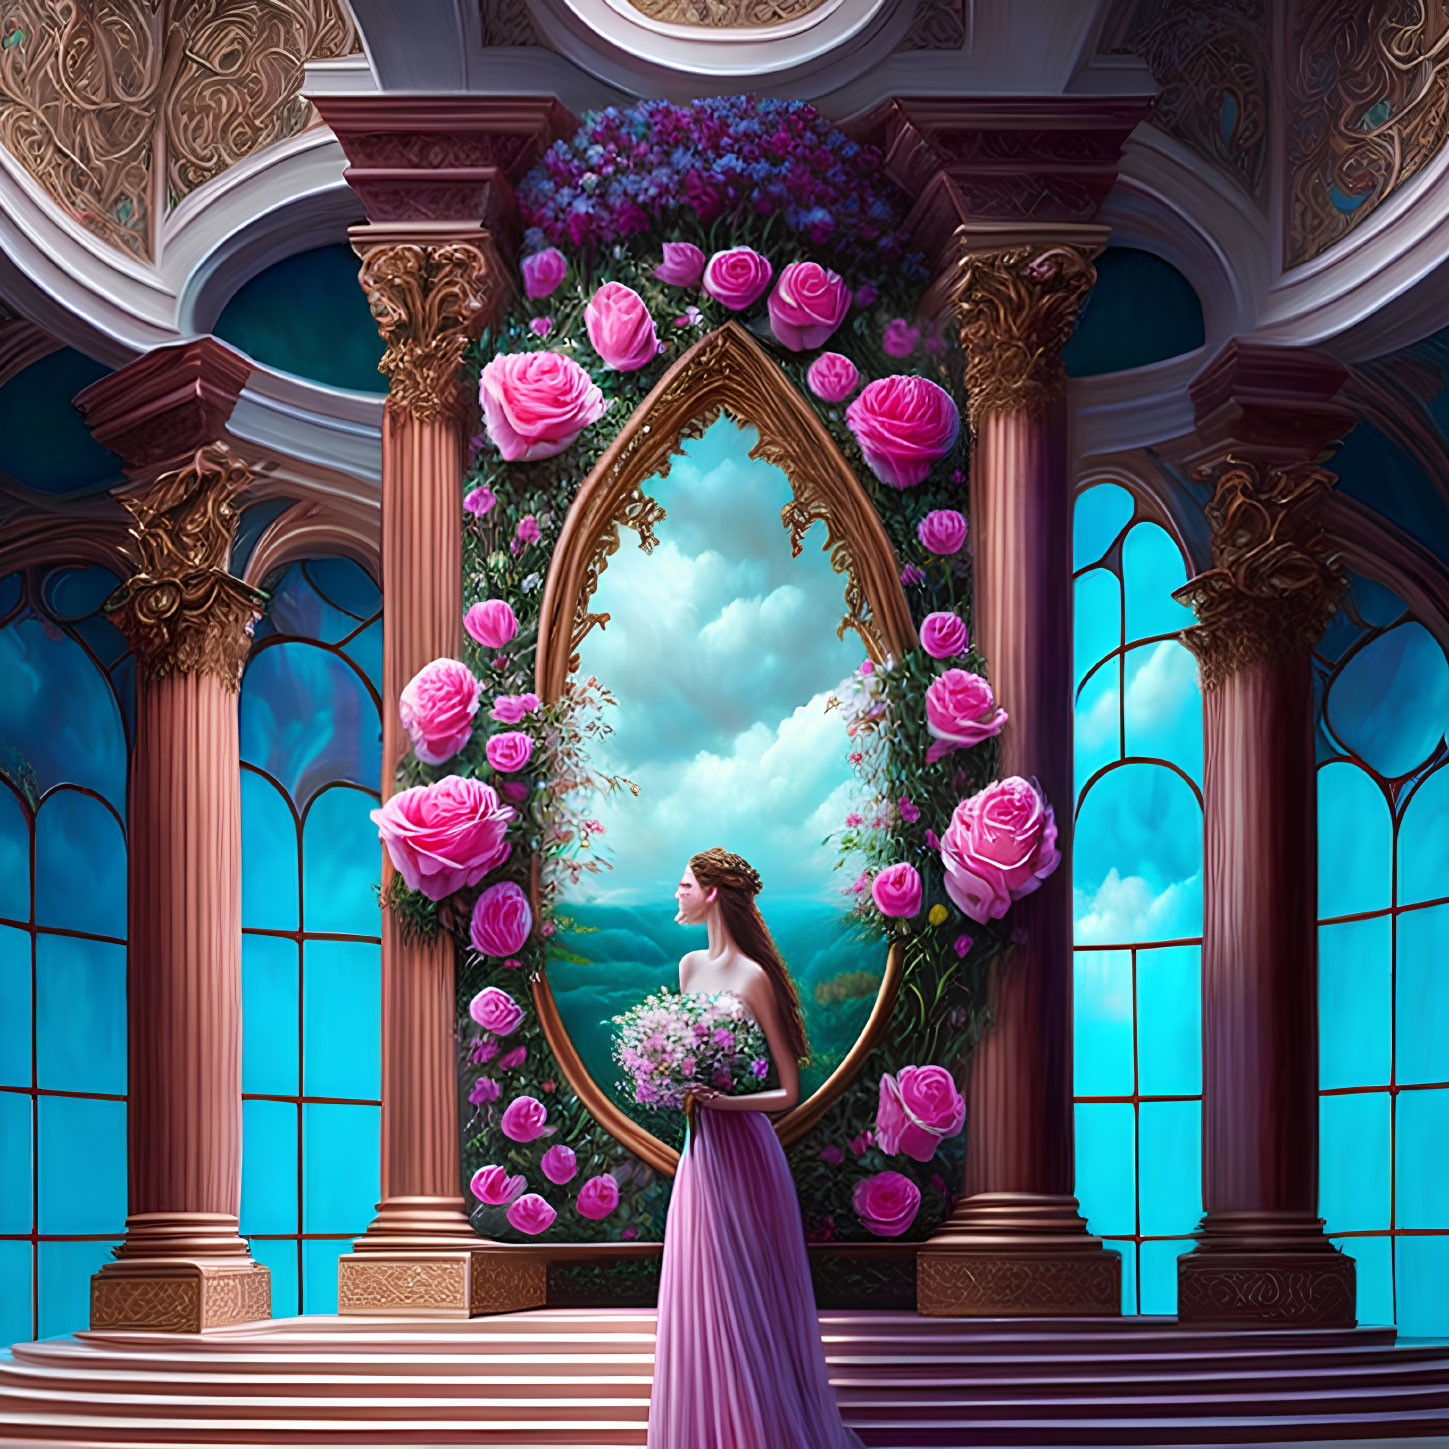 Woman in Purple Gown Reflecting Sky in Oval Mirror in Elegant Hall